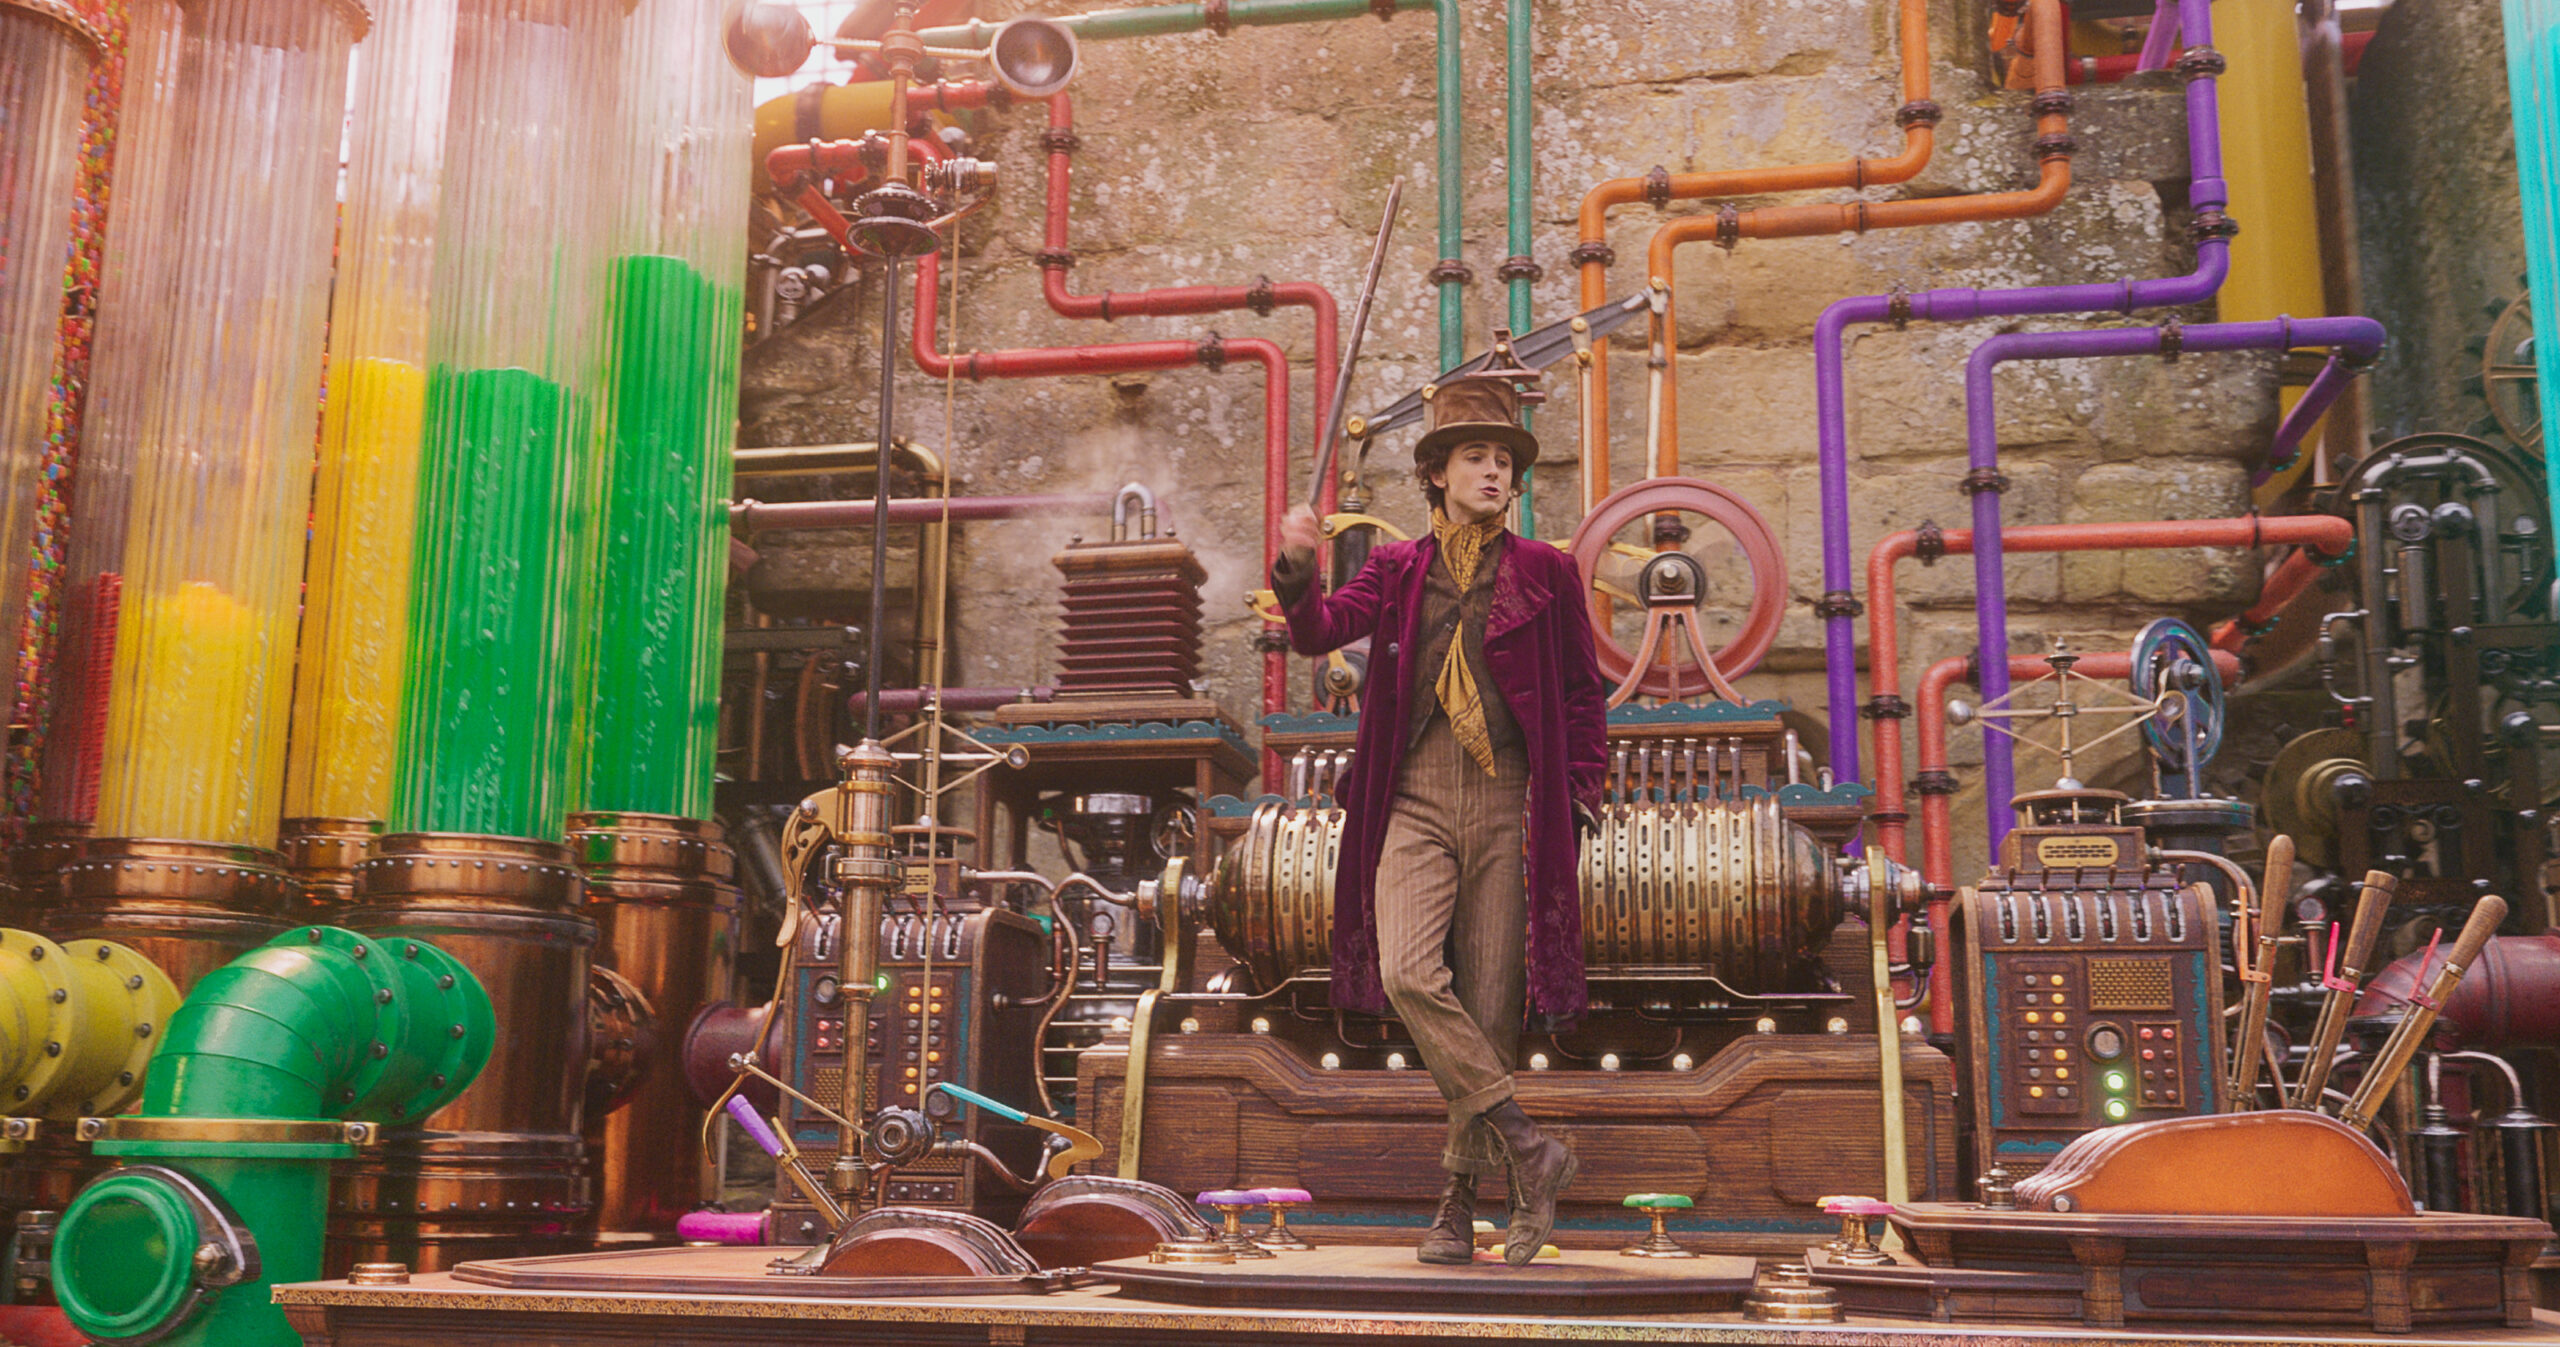 Timothée Chamalet as Willy Wonka in "Wonka" (Photo Credit: Courtesy of Warner Bros. Pictures)